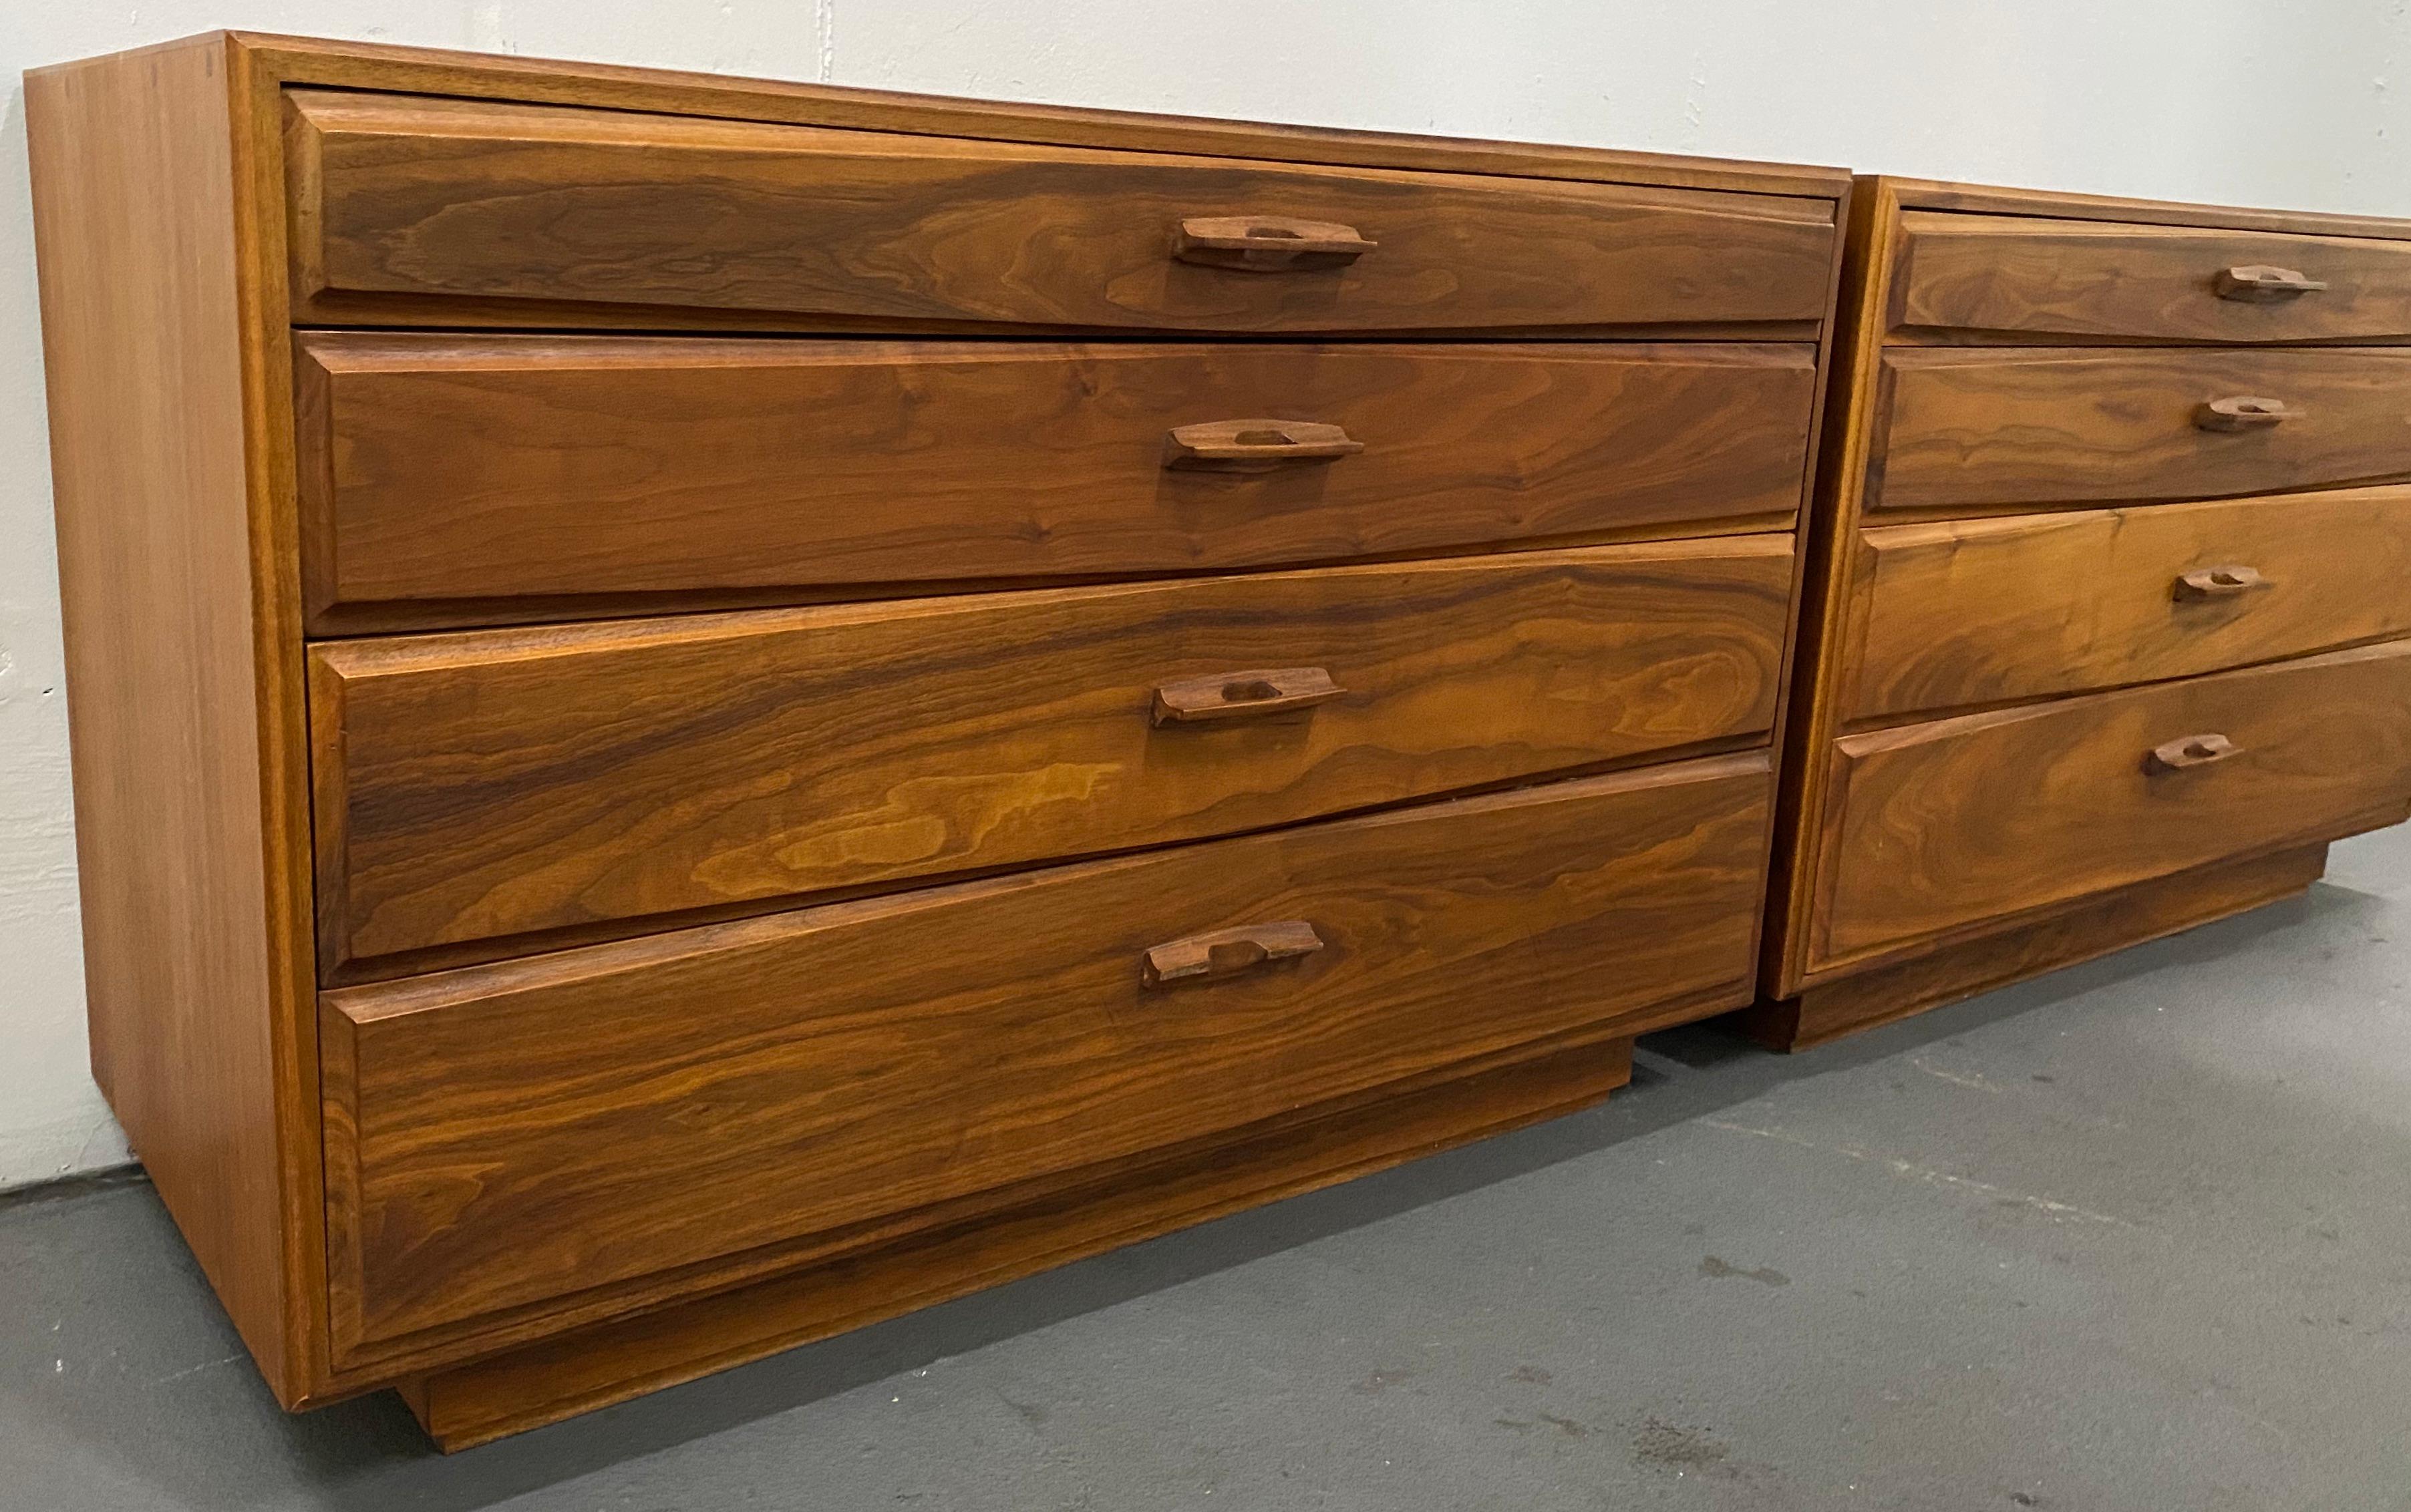 Matching pair of John Kapel Mid-Century Modern walnut dressers

Classic Mid-Century Modern chest of drawers

John Kapel (1922- ) is a designer living in Woodside, California. He graduated from the Cranbrook Academy of Art in Bloomfield,